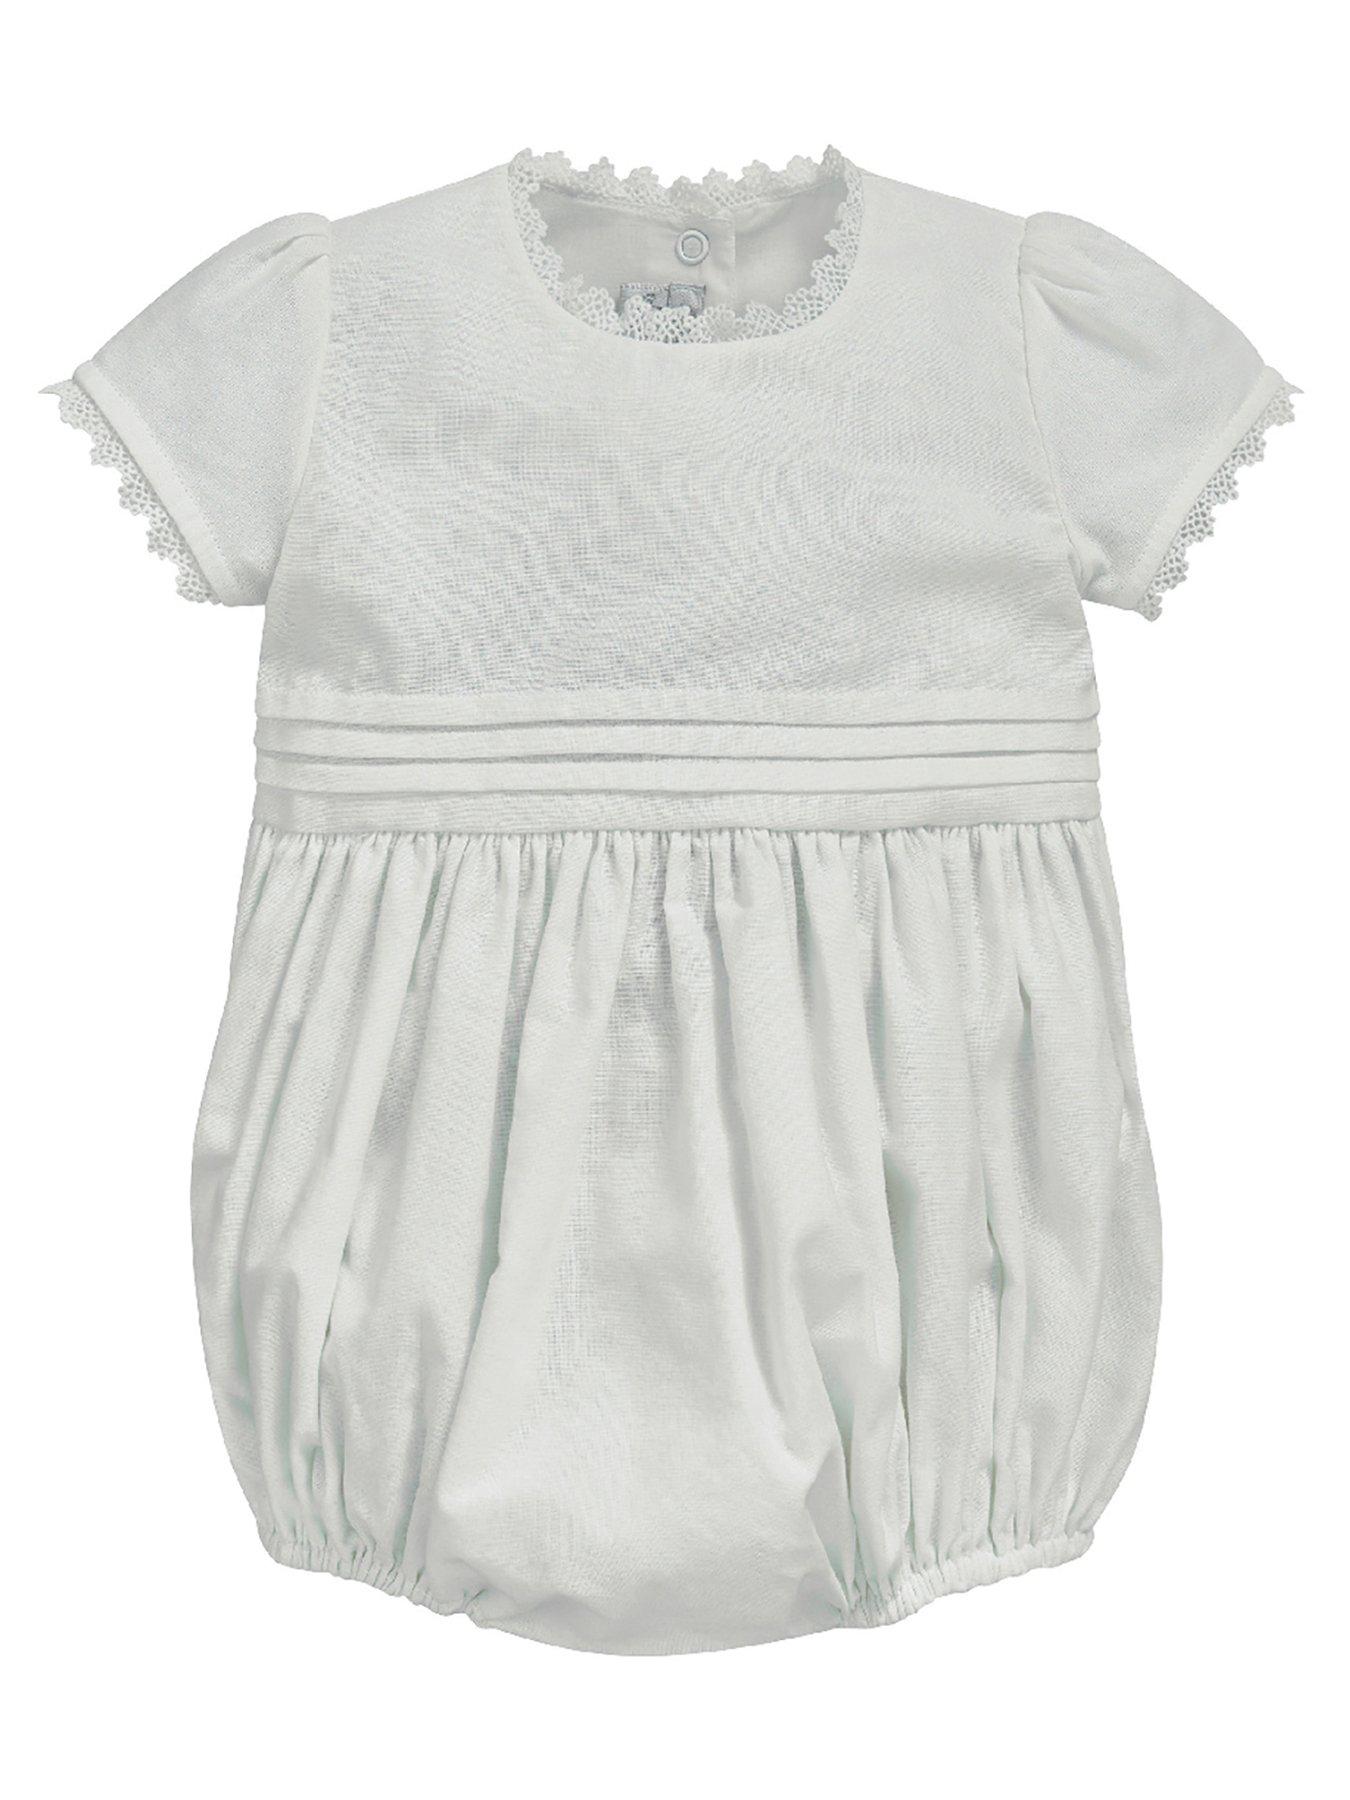 Mamas & Papas Baby Girls Textured All-in-one with Bow Romper